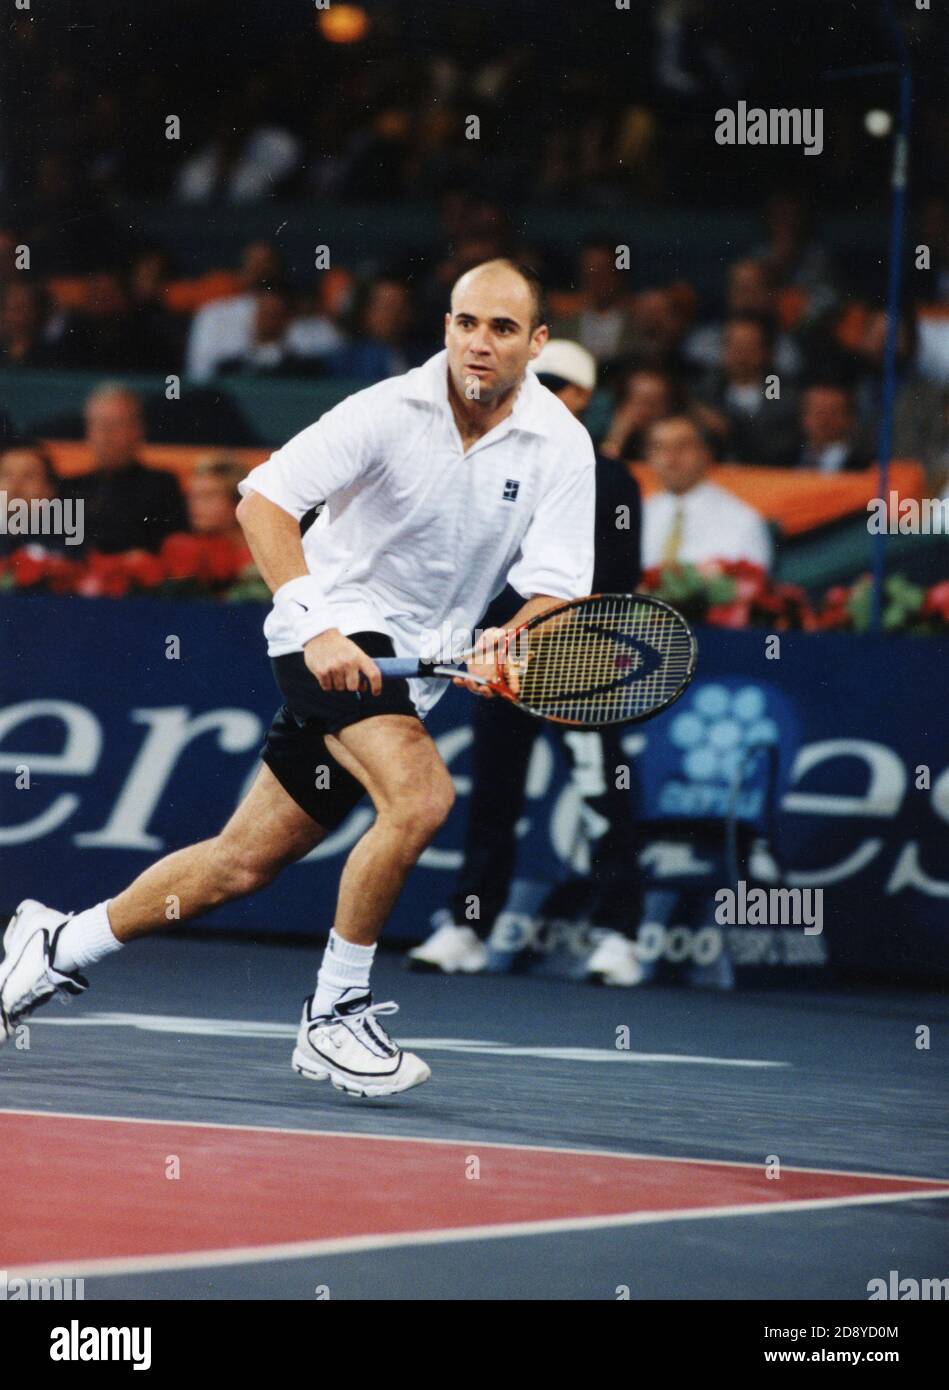 American tennis player Andre Agassi, 2000s Stock Photo